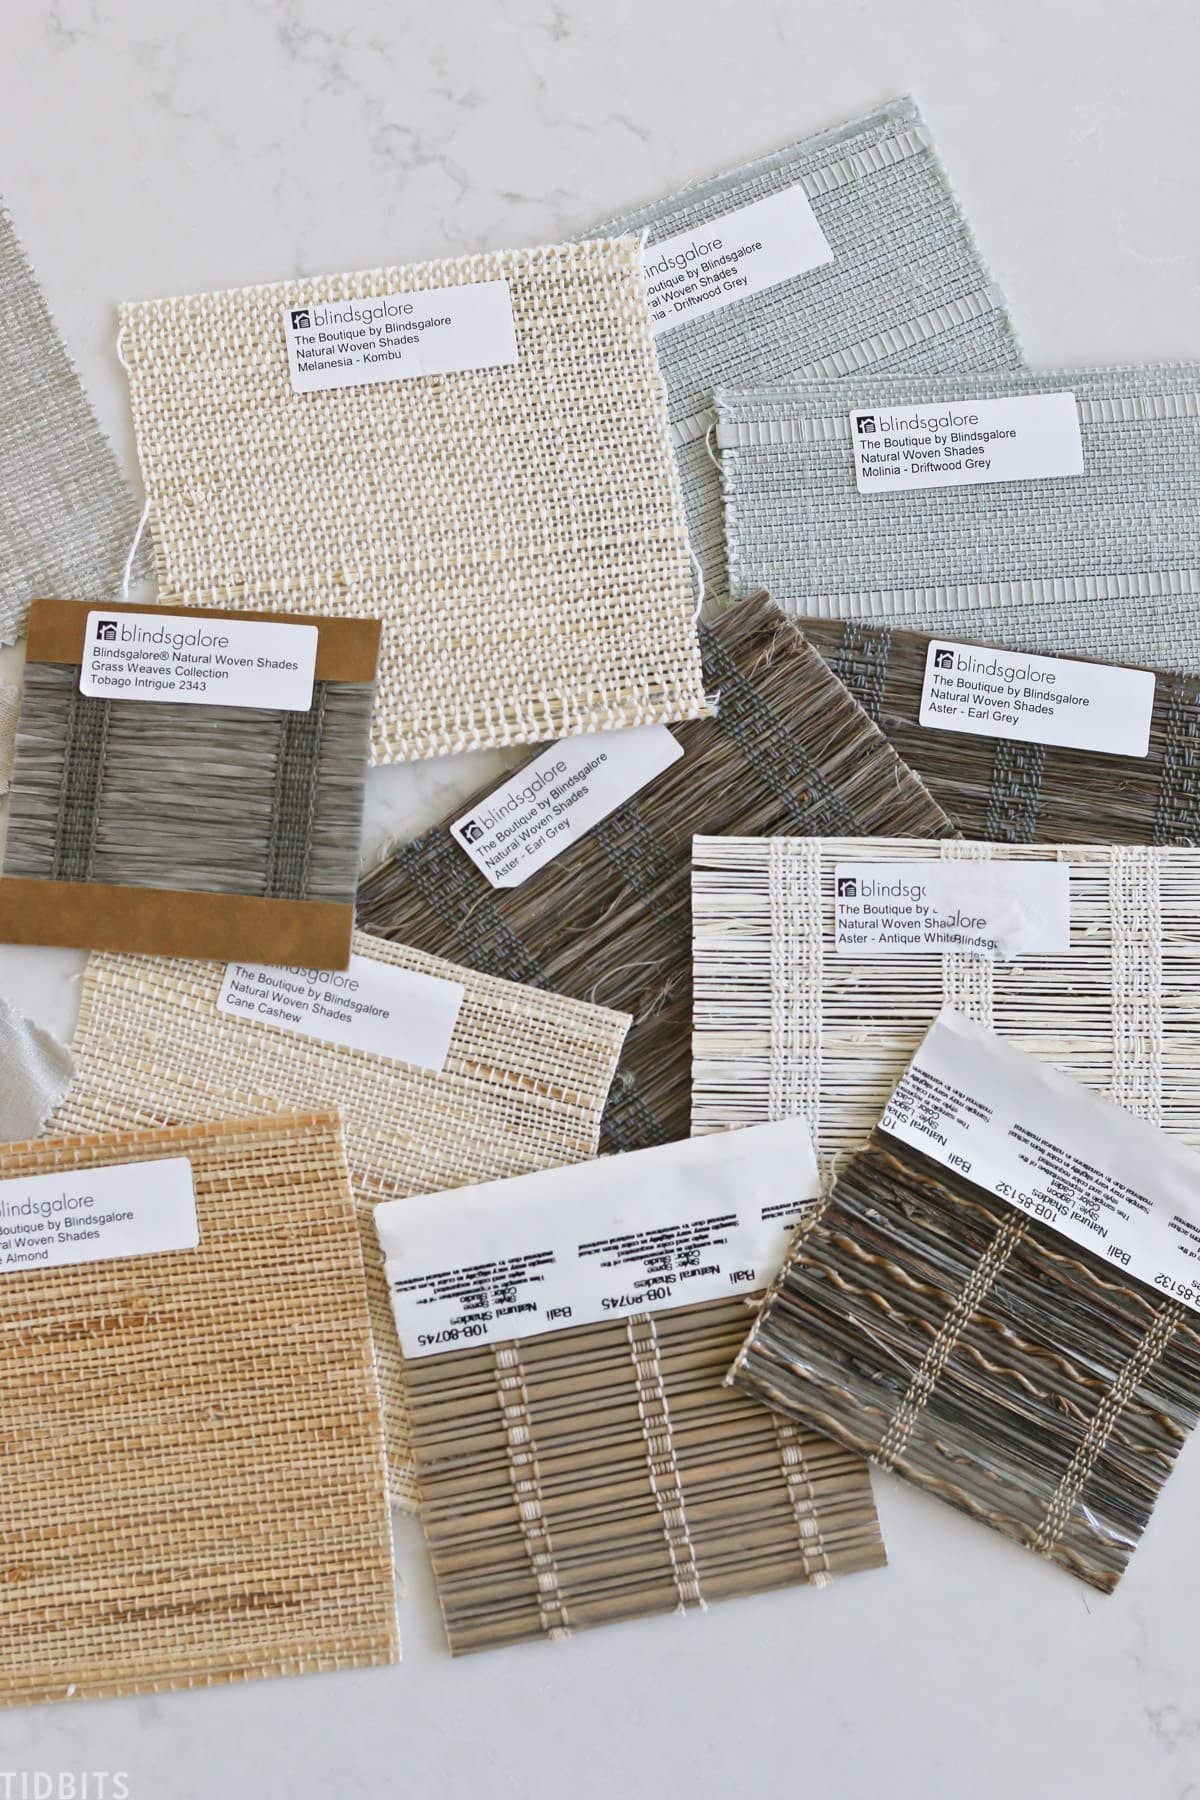 samples of window blinds